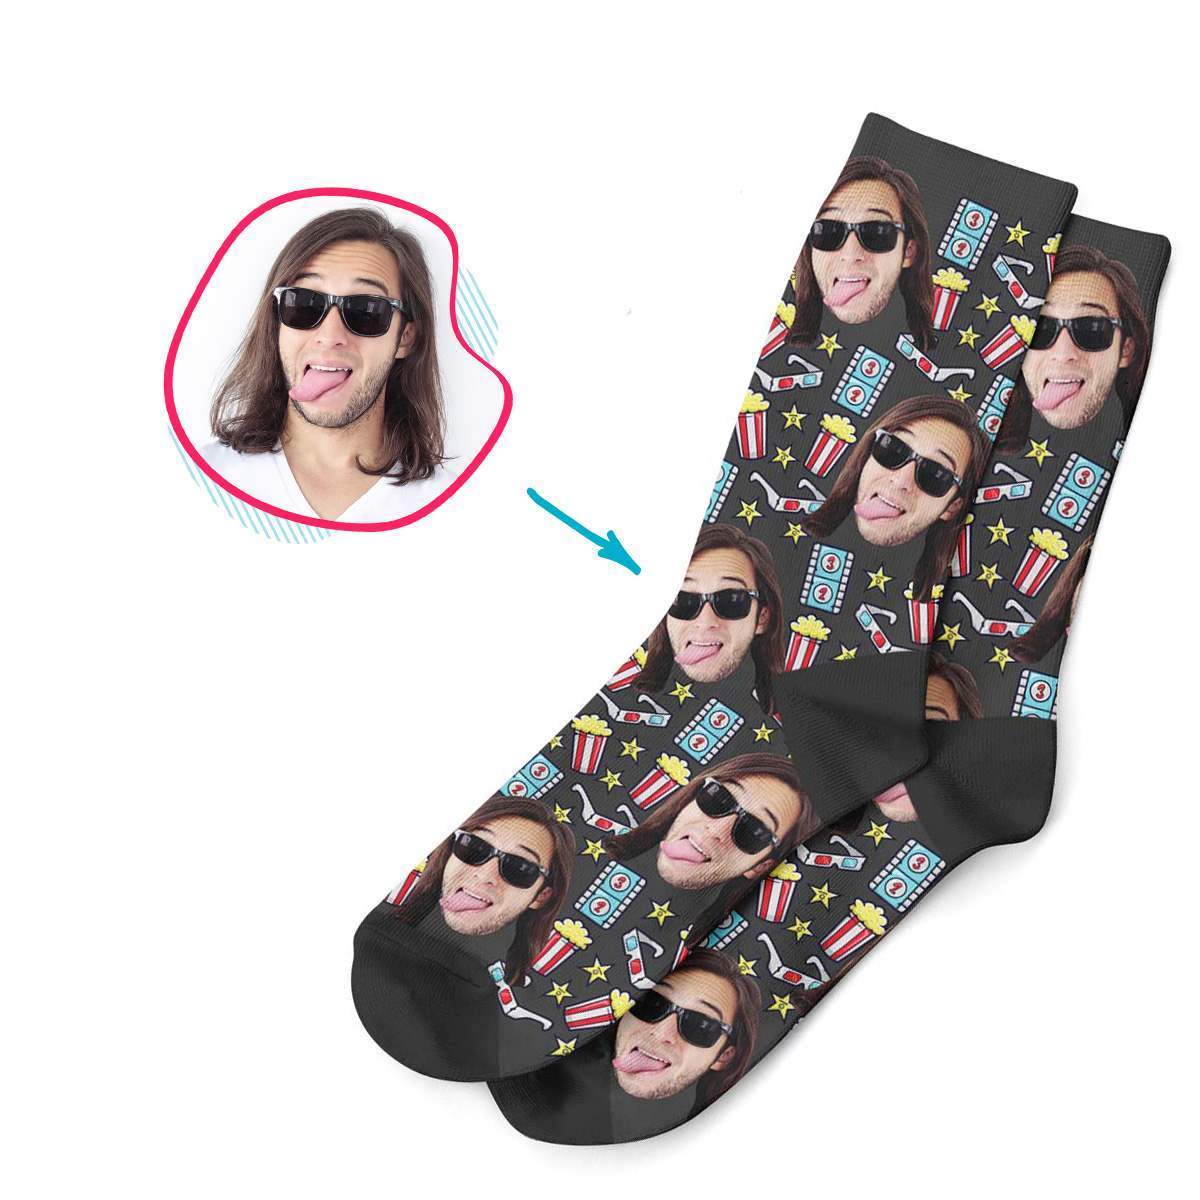 dark Movie socks personalized with photo of face printed on them